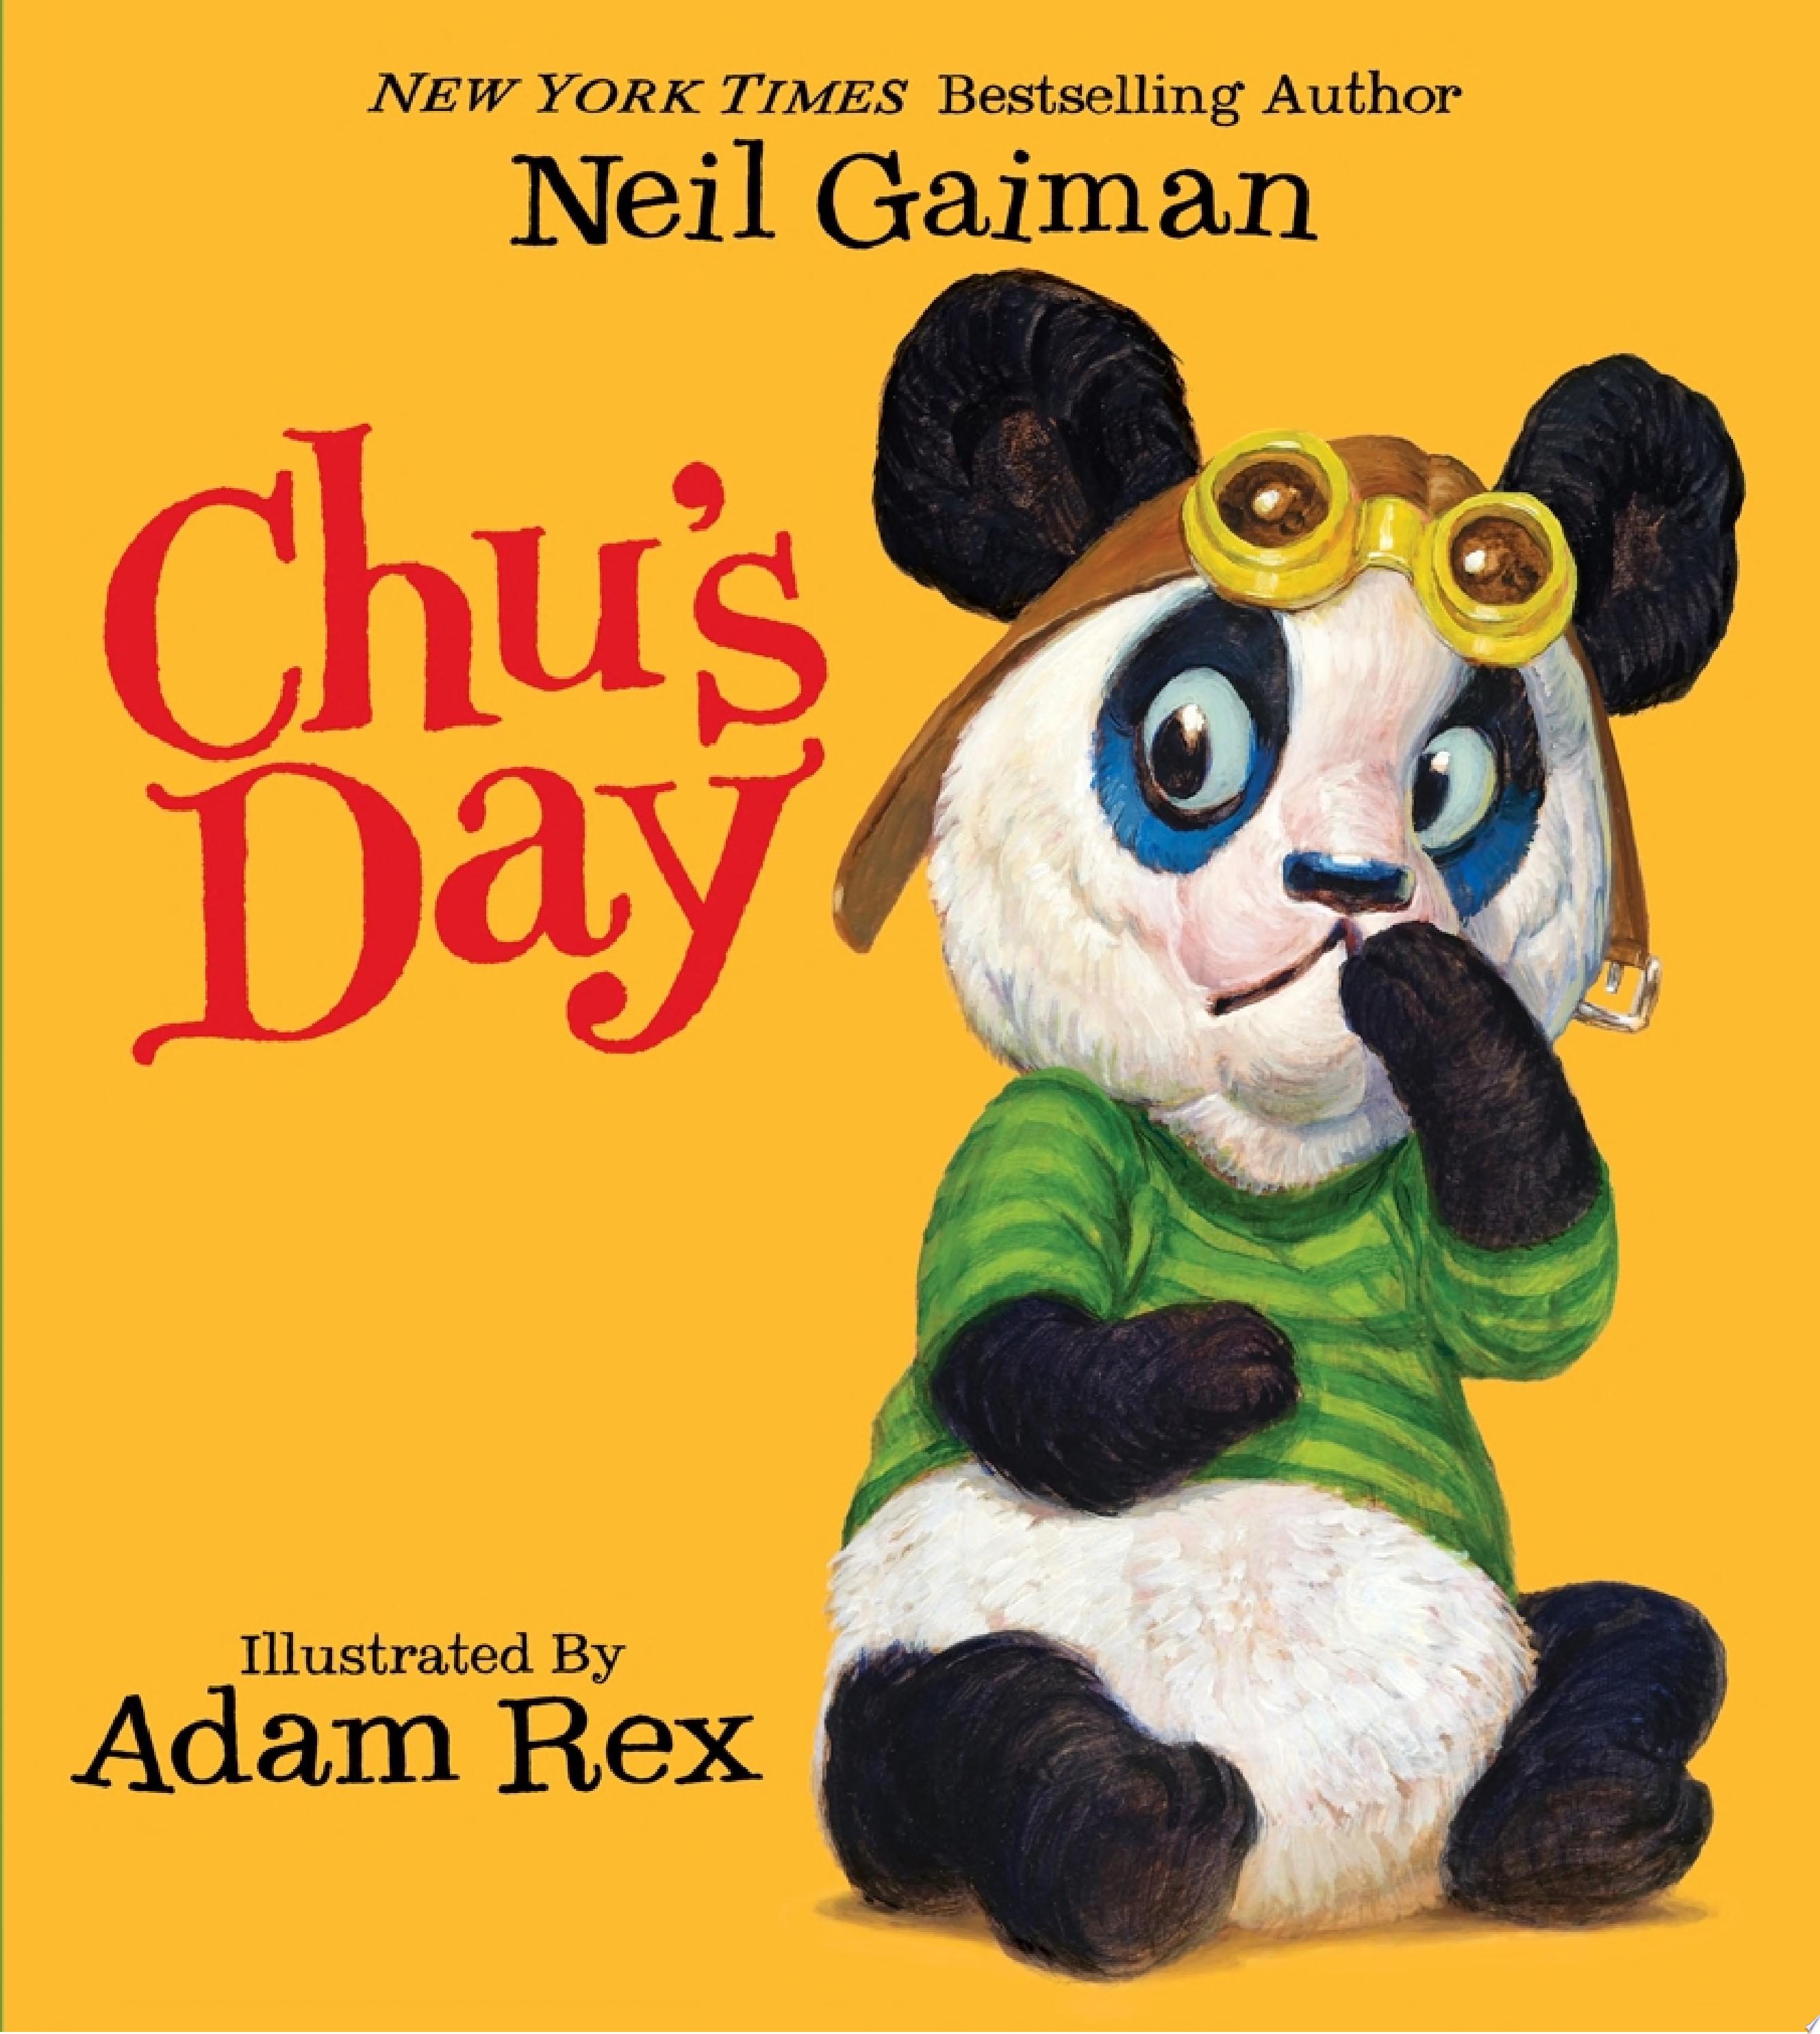 Image for "Chu's Day"